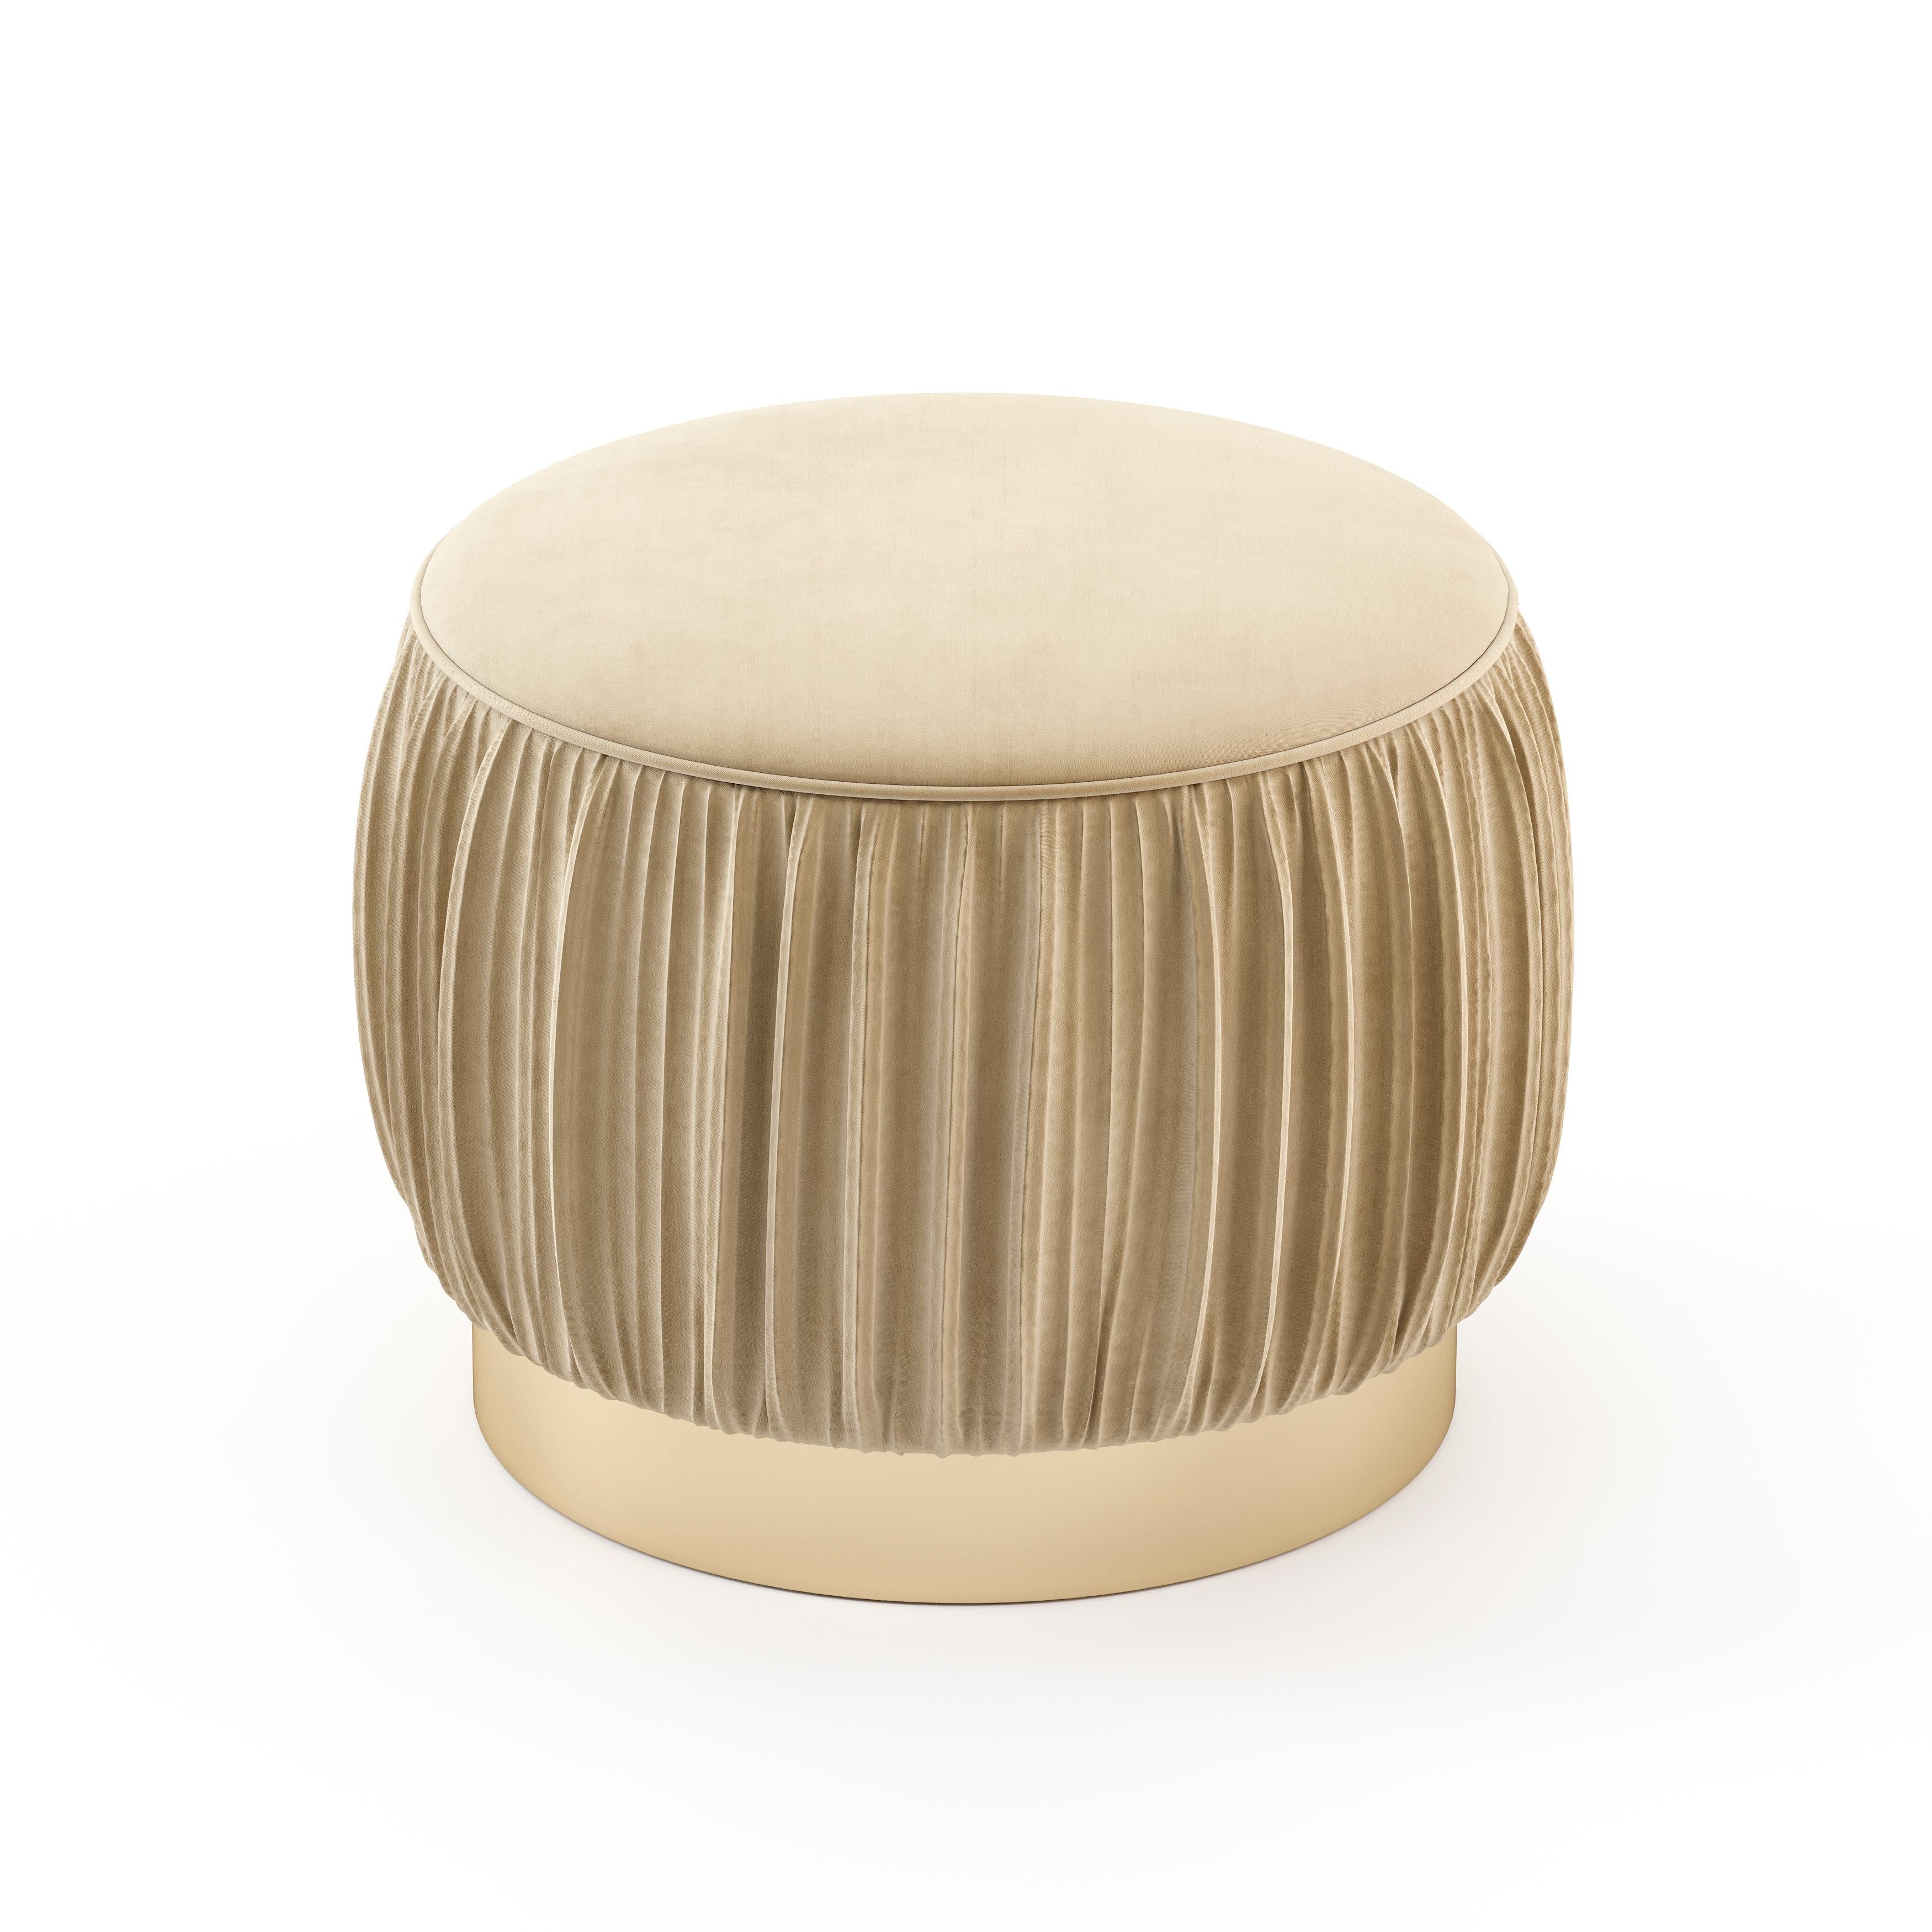 Born from mixed textures, René pouf is a stunning home accessory for sophisticated rooms. This upholstered pouf fits perfectly on a warm and cozy decor. Add a luxe look to your residential projects with the René floor pouf. The beauty of interiors